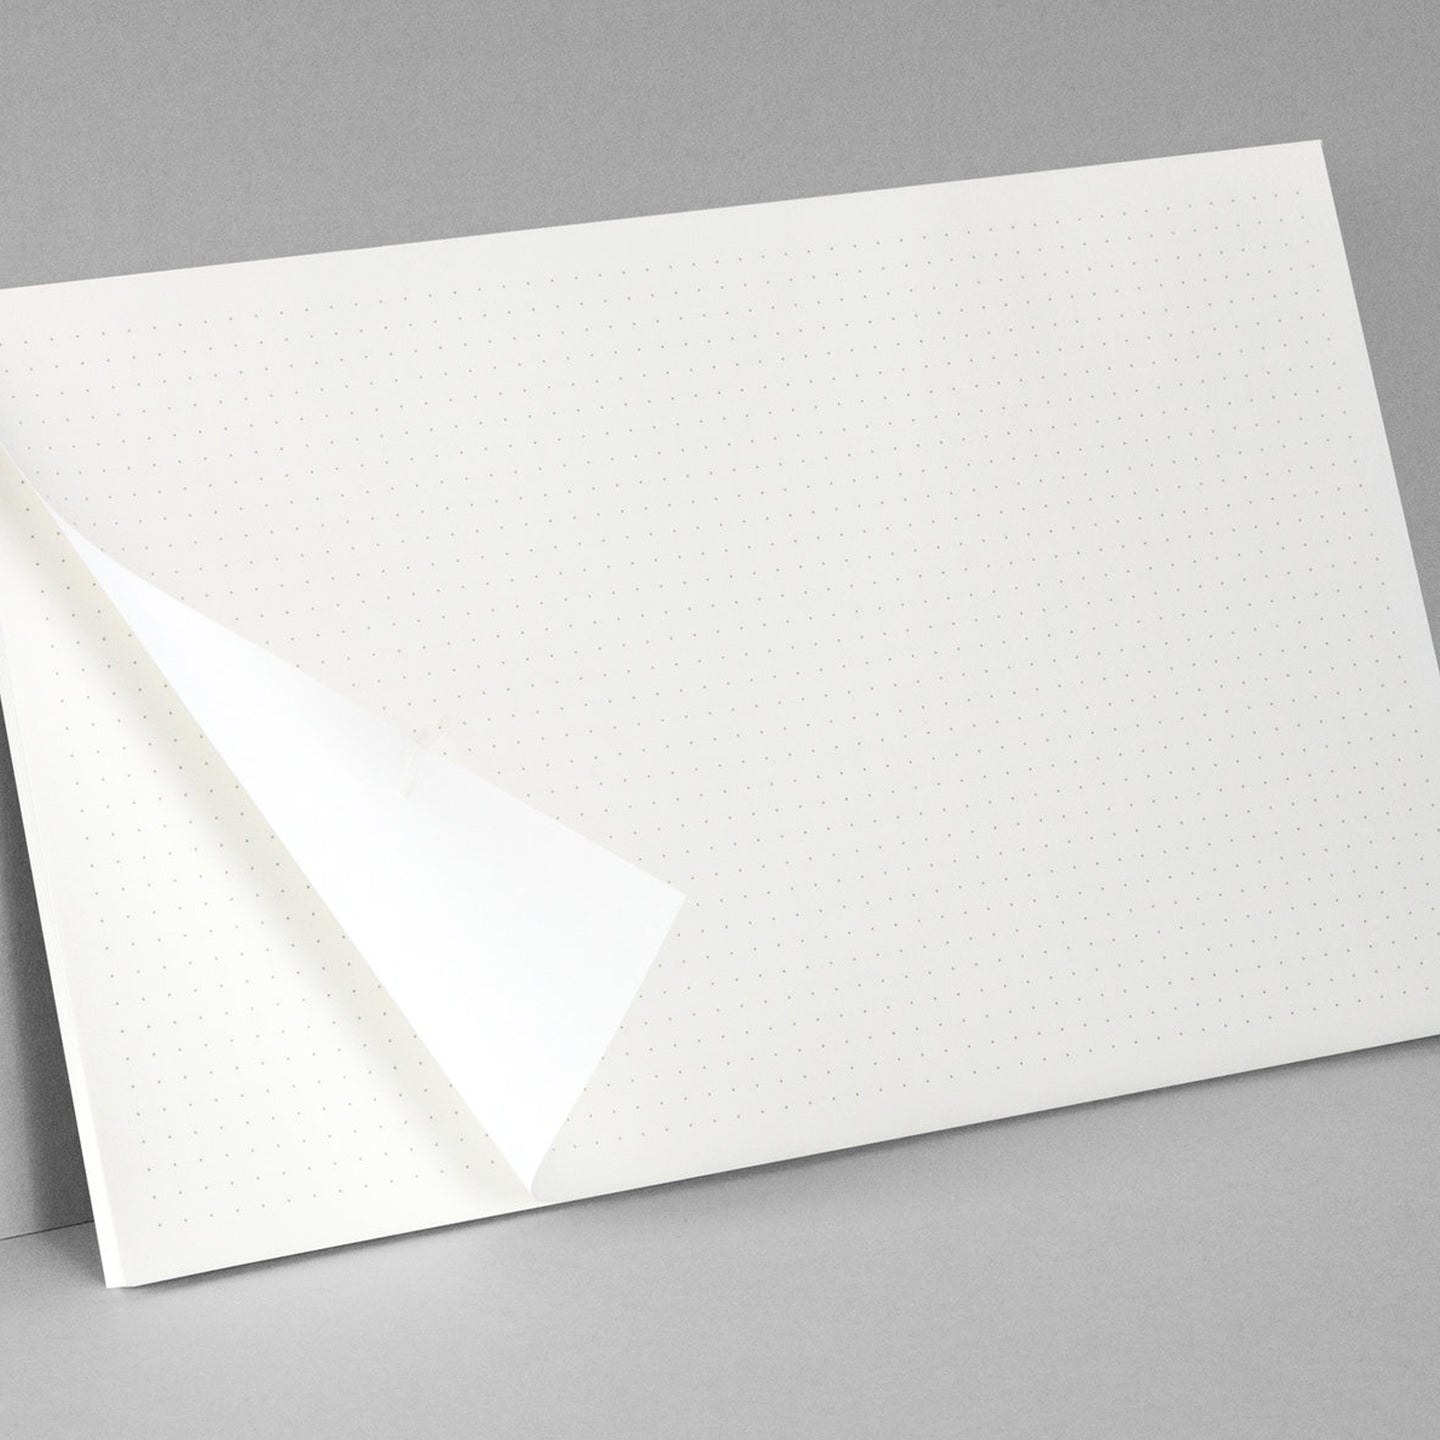 Ola Desktop Pad - Dotted Pages